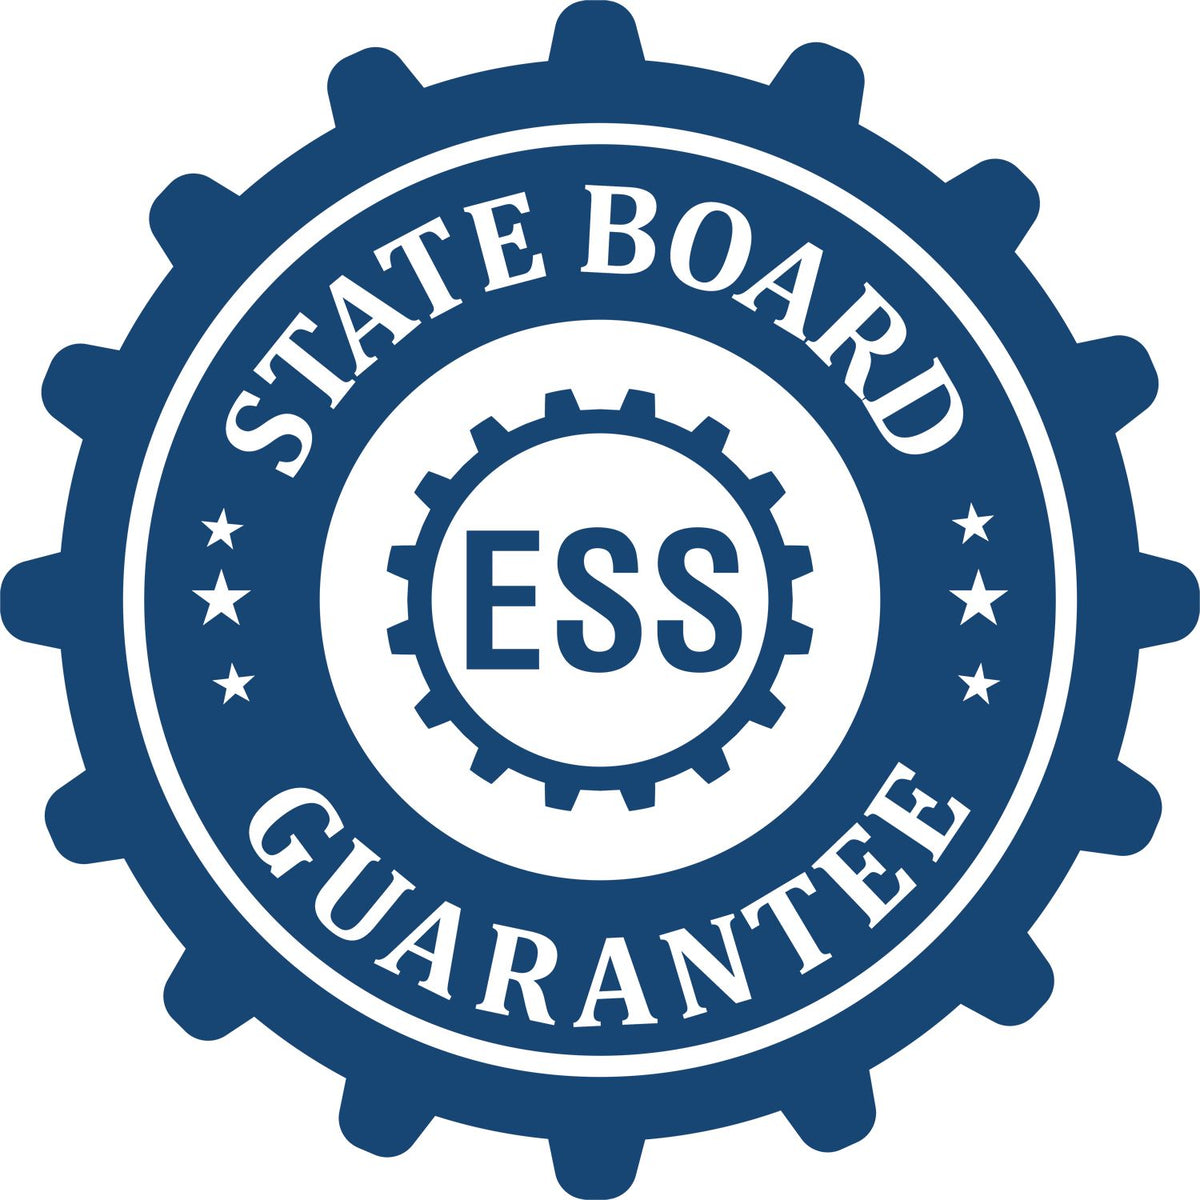 An emblem in a gear shape illustrating a state board guarantee for the Gift Nevada Landscape Architect Seal